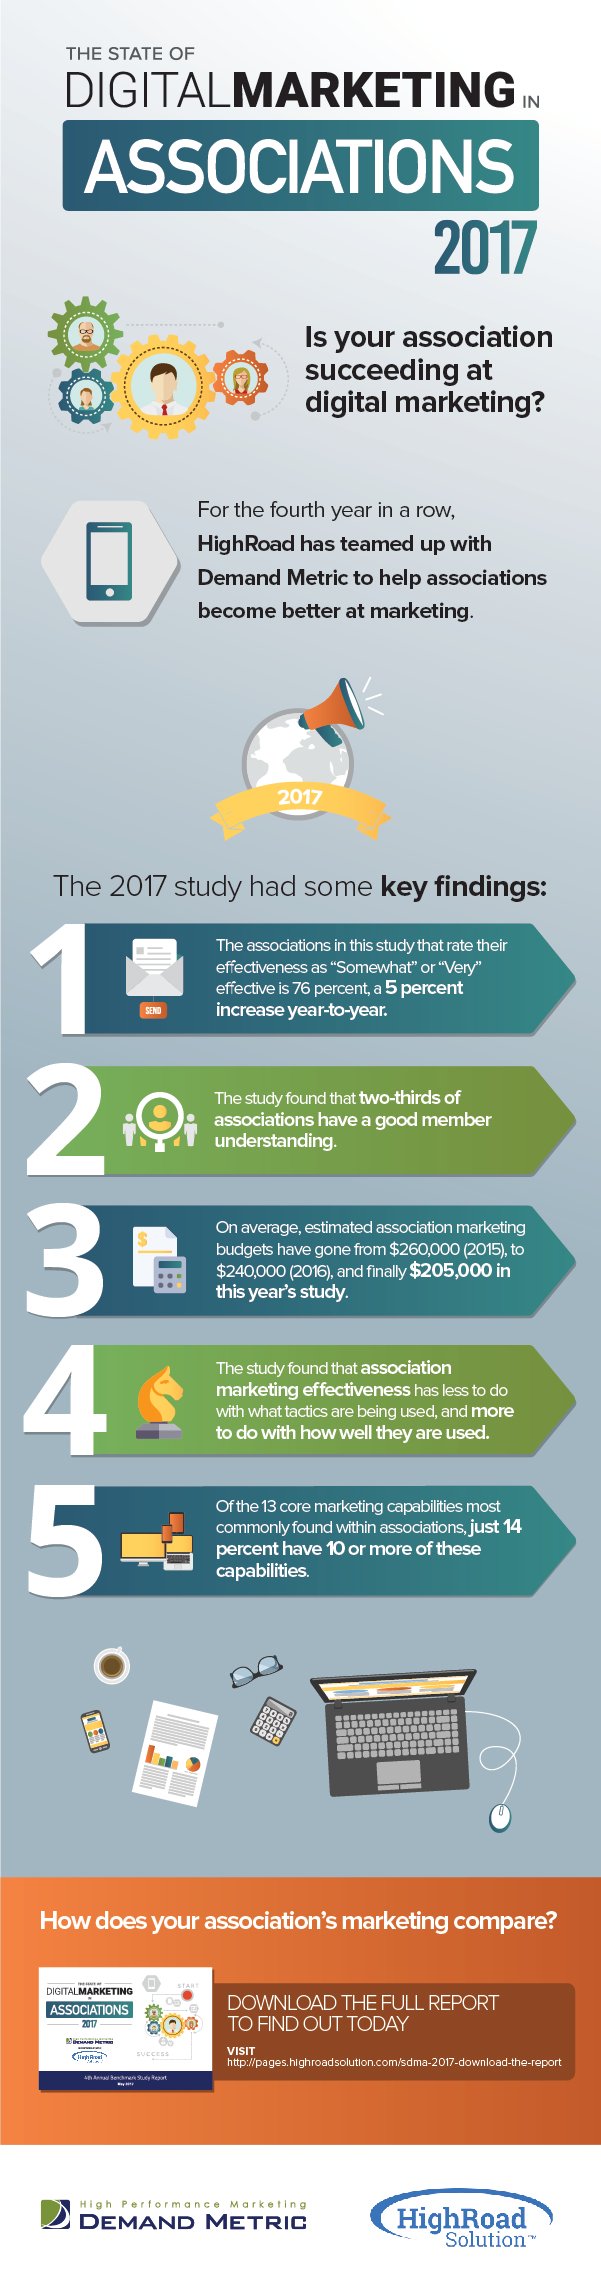 Infographic of the Week: The 2017 State Of Digital Marketing In Associations Report